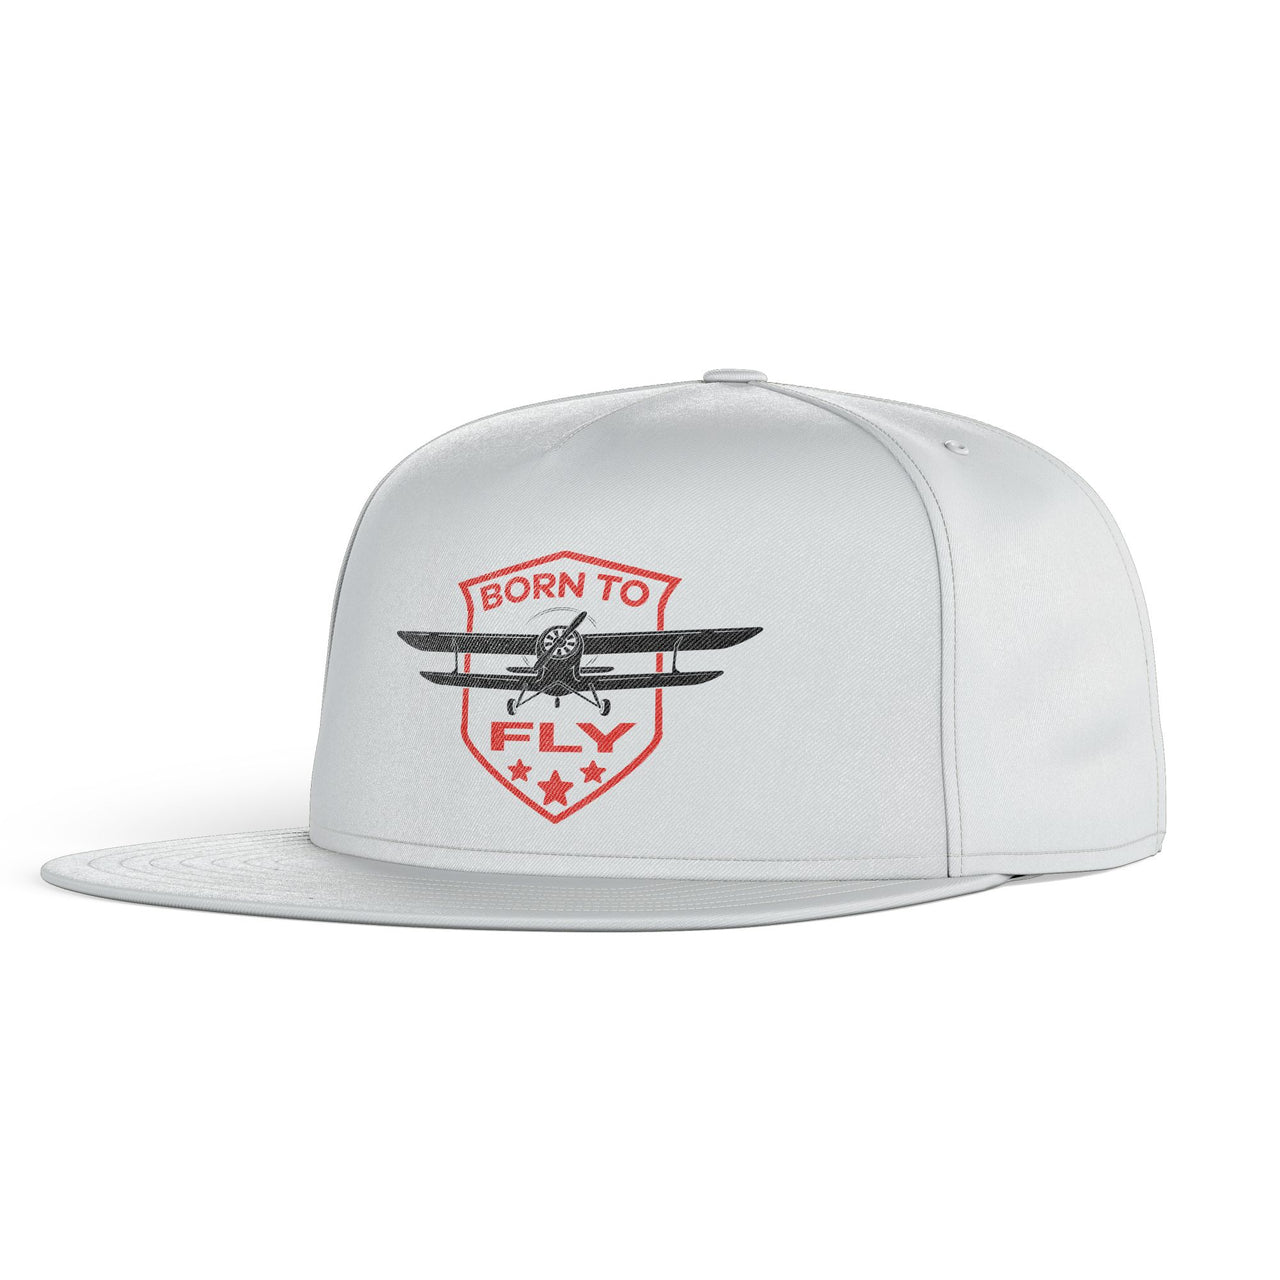 Super Born To Fly Designed Snapback Caps & Hats